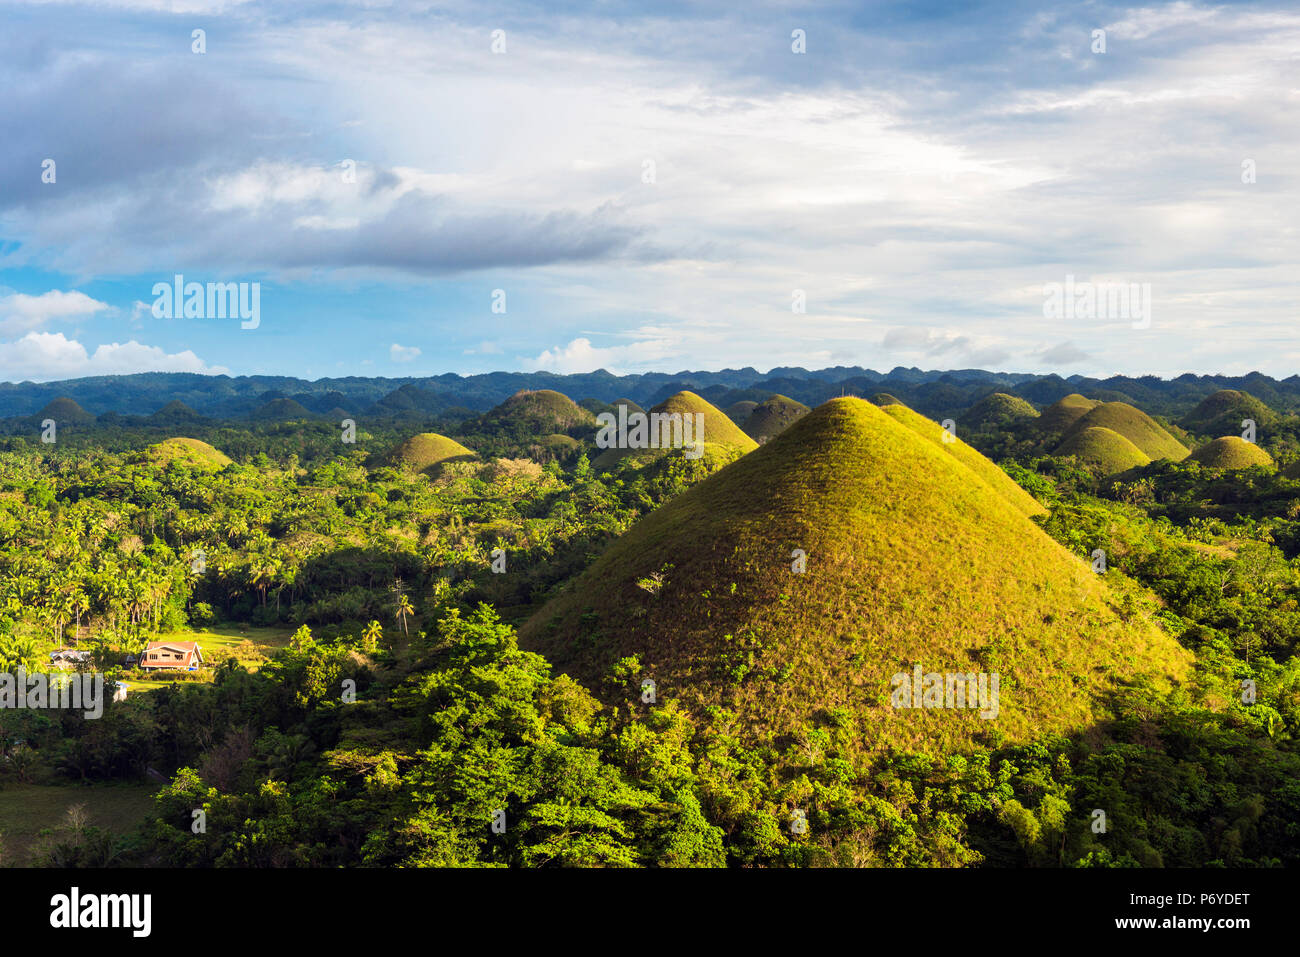 Asia, South East Asia, Philippines, Central Visayas, Bohol, Chocolate hills Stock Photo